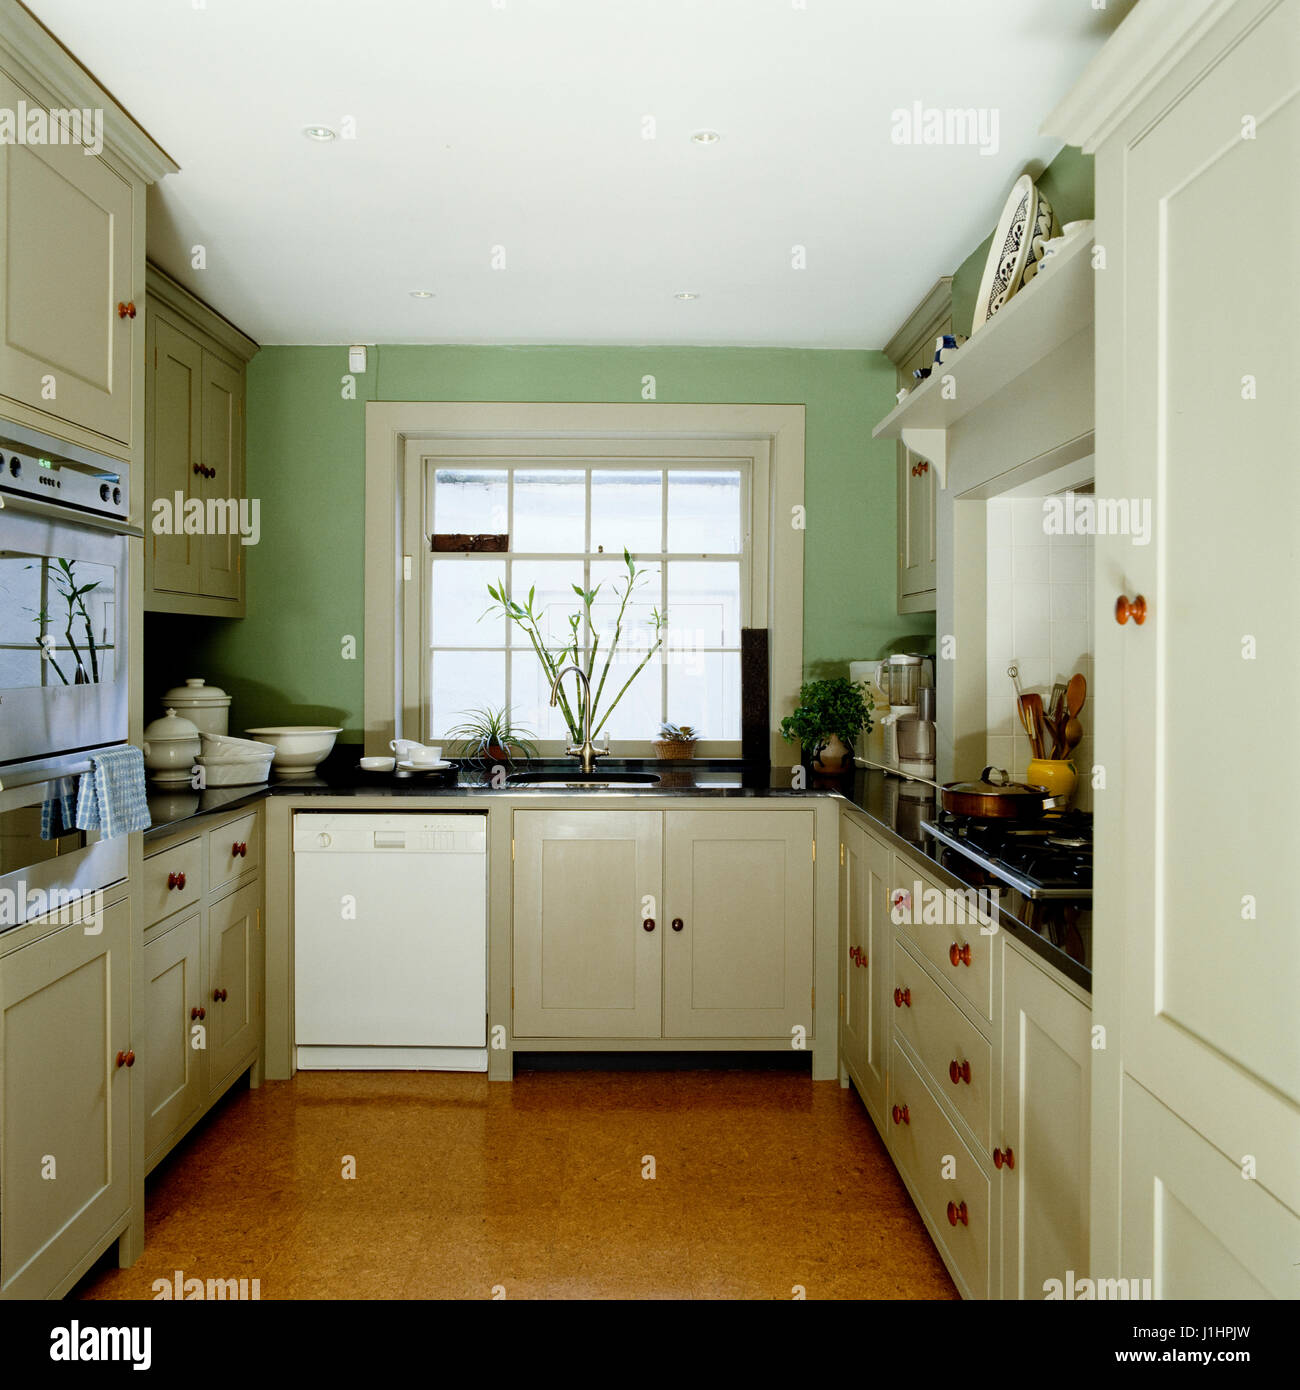 Simple country style kitchen. Stock Photo